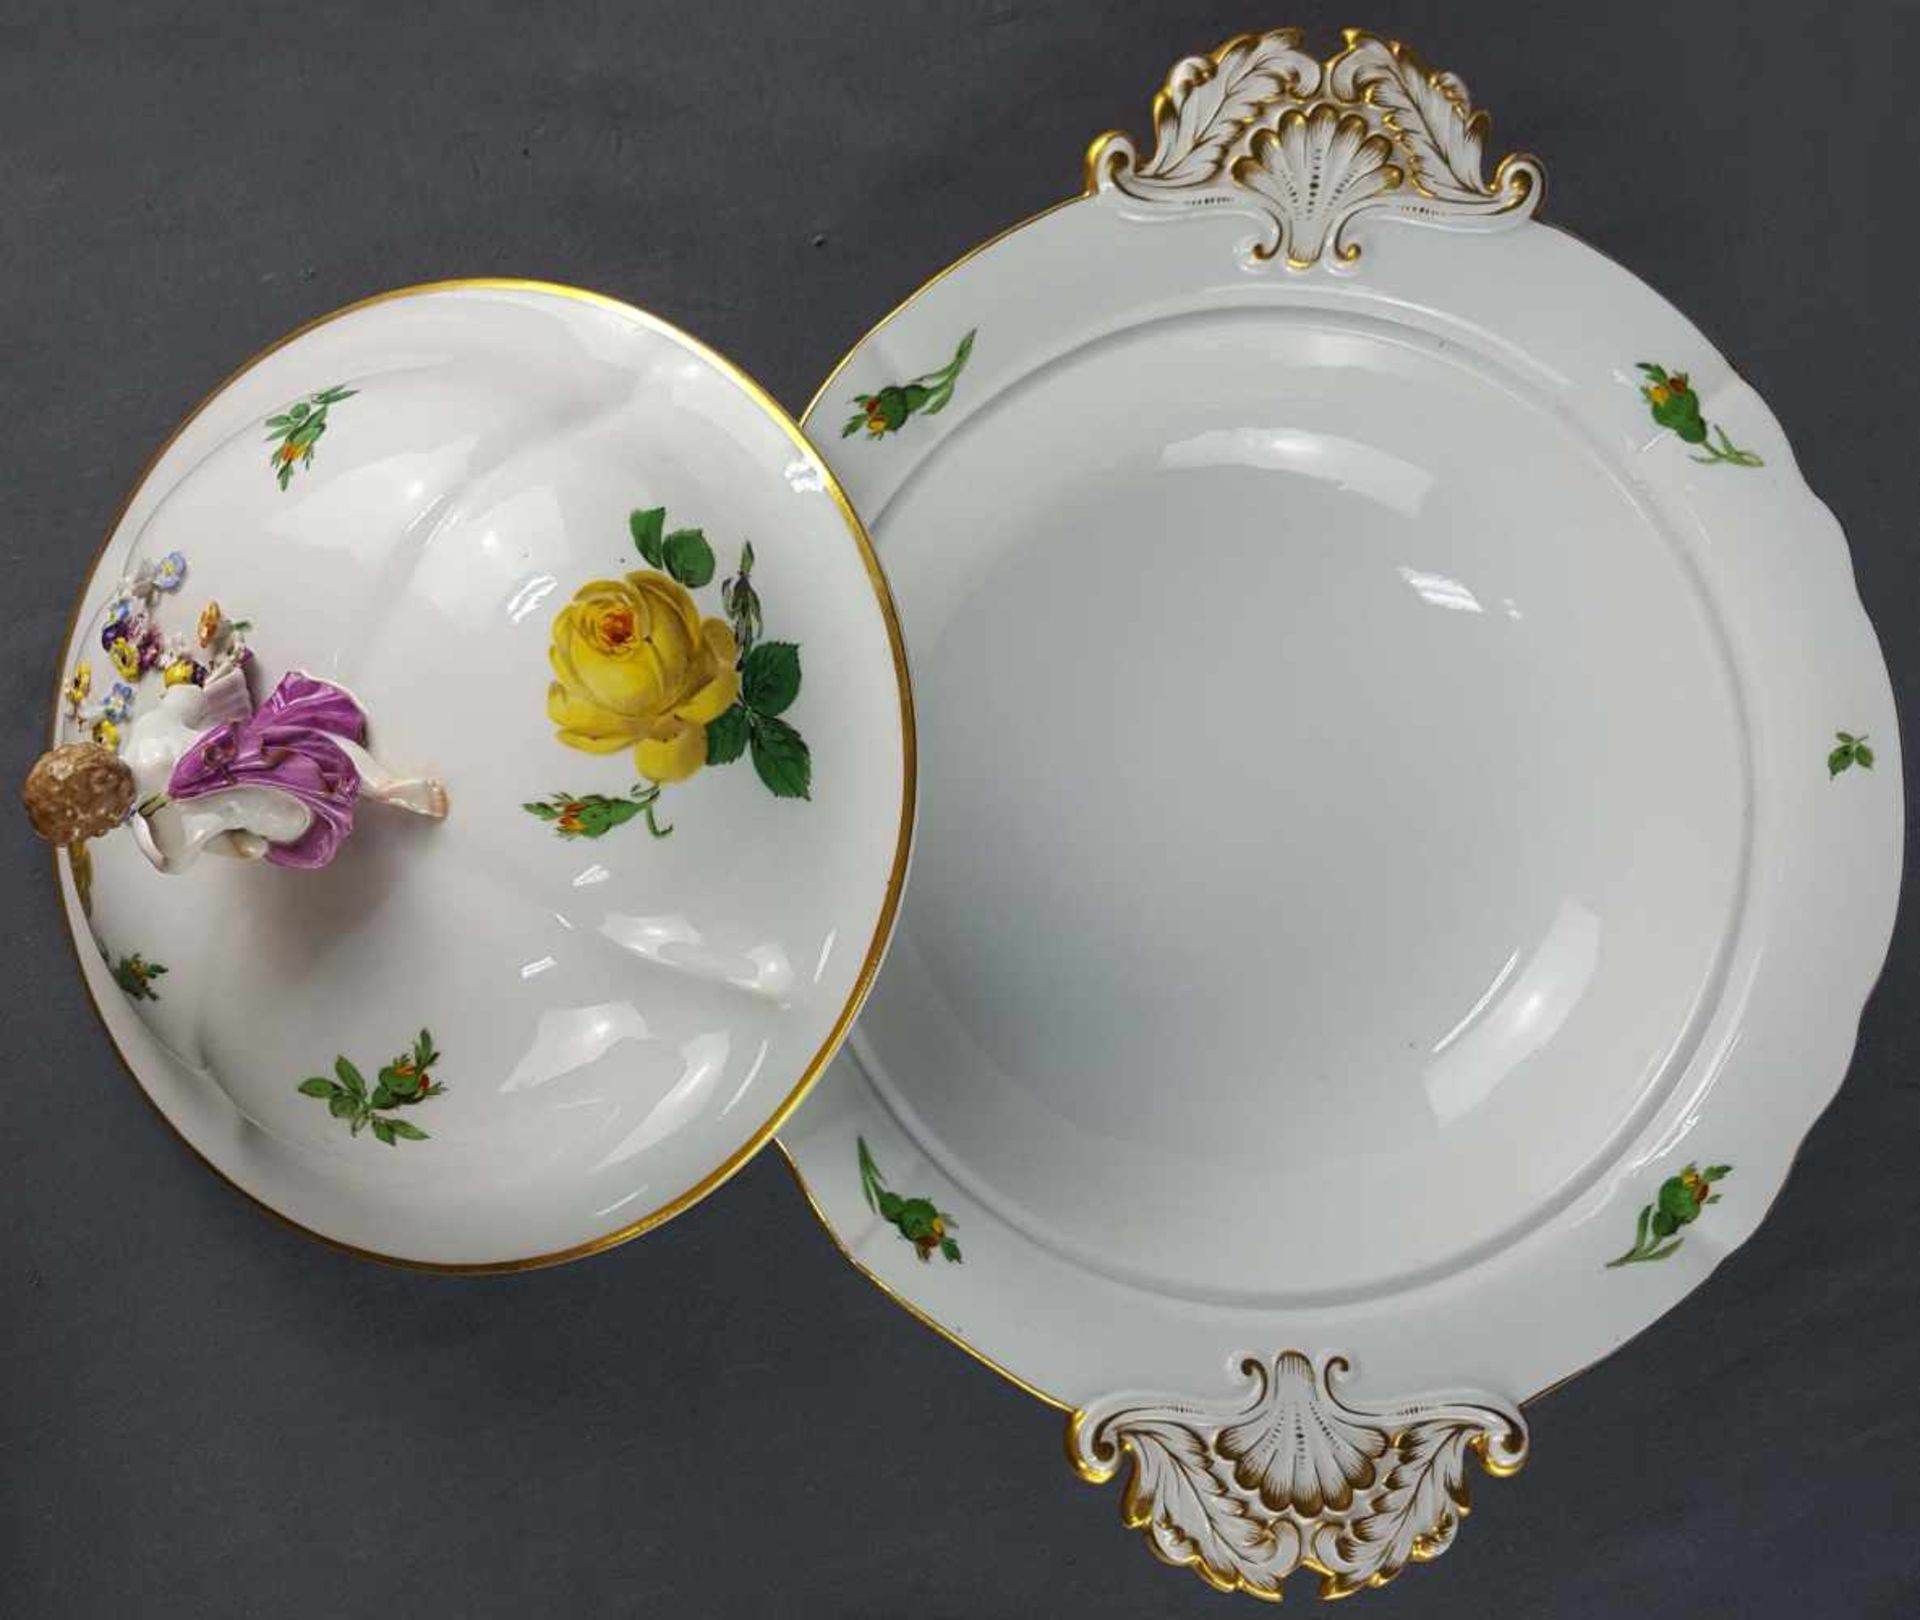 Dining service Meissen porcelain, yellow rose with gold rim. - Image 4 of 18